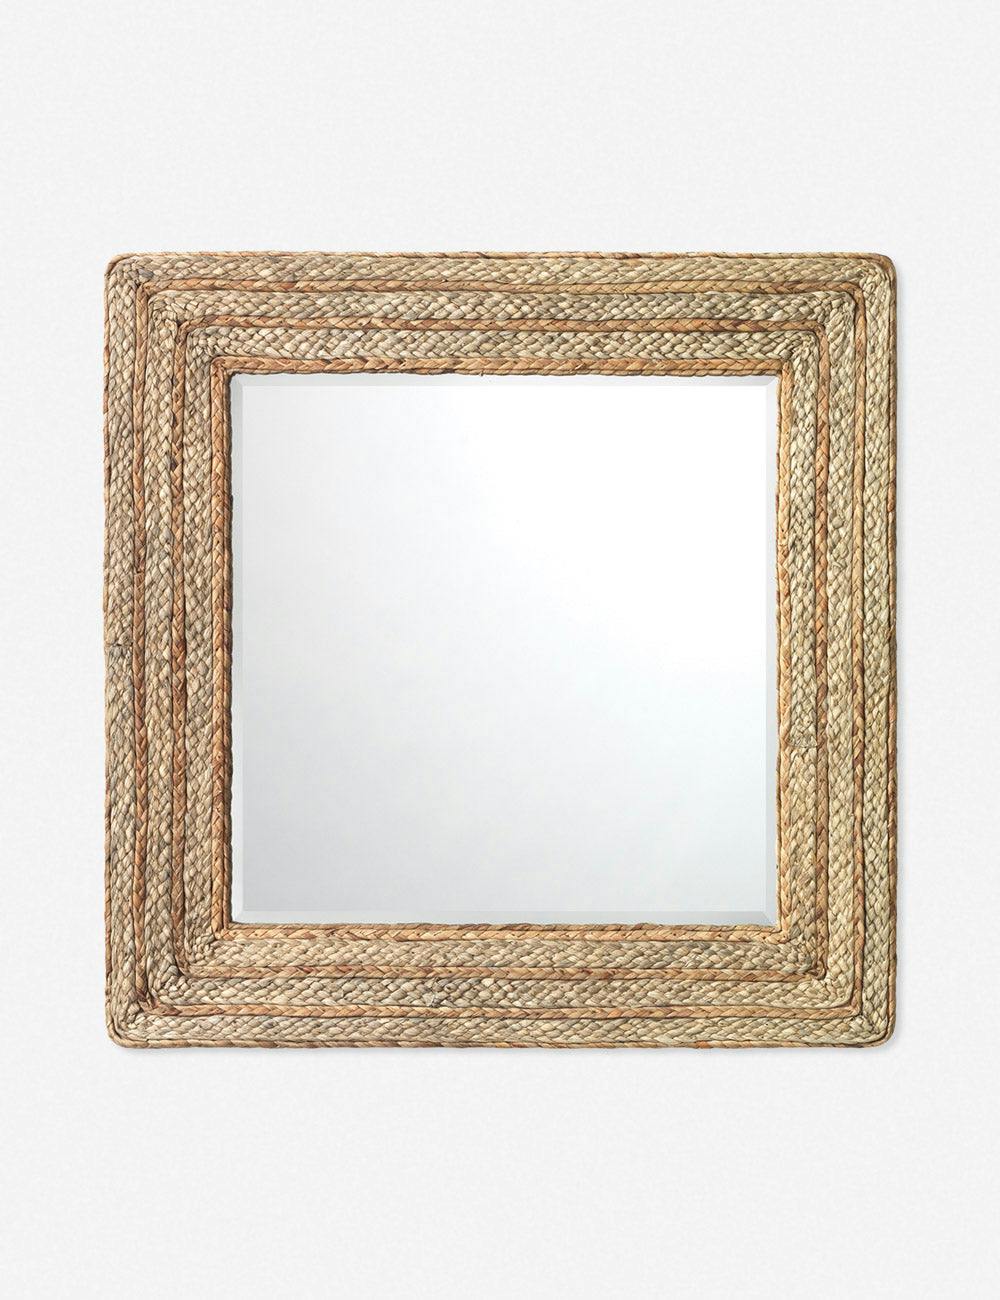 Hand-Braided Seagrass Square Wall Mirror, 30" Natural Finish